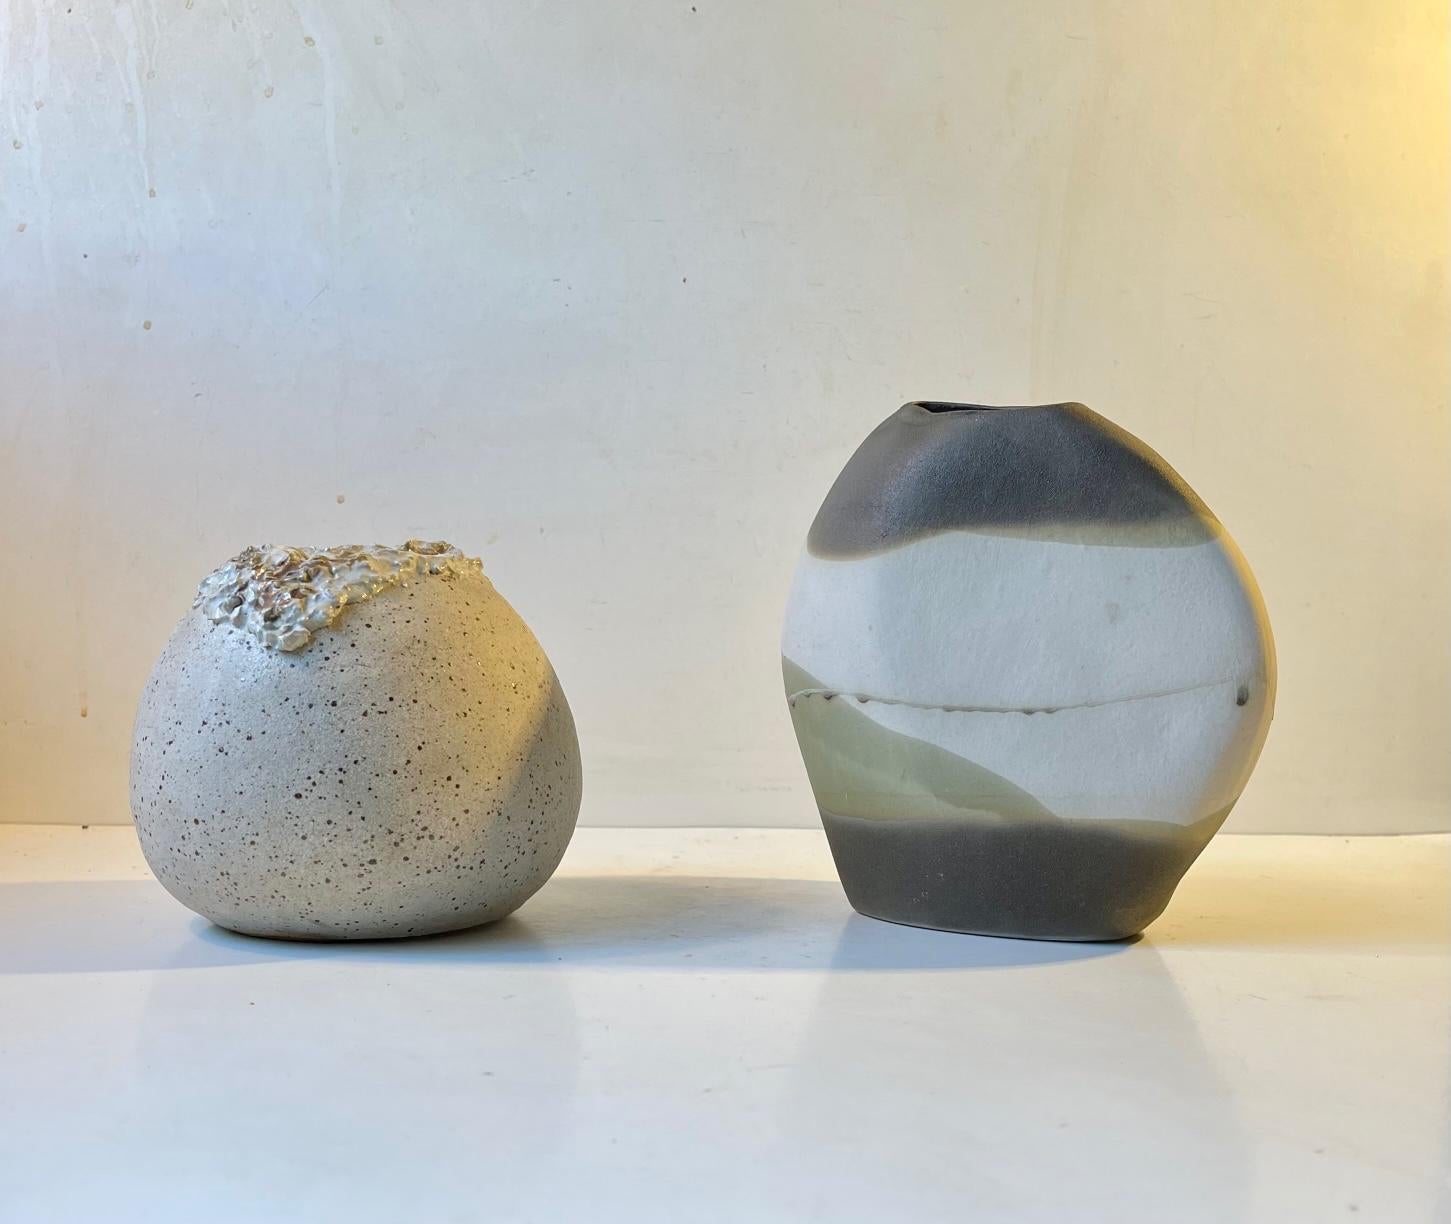 A curated set of morphic resonance vases. One that tries to mimic the human vulva and one with a more geological approach mimicking the asymmetrical qualities and texture of a rock/stone. Both pieces were studio made by unidentified Scandinavian